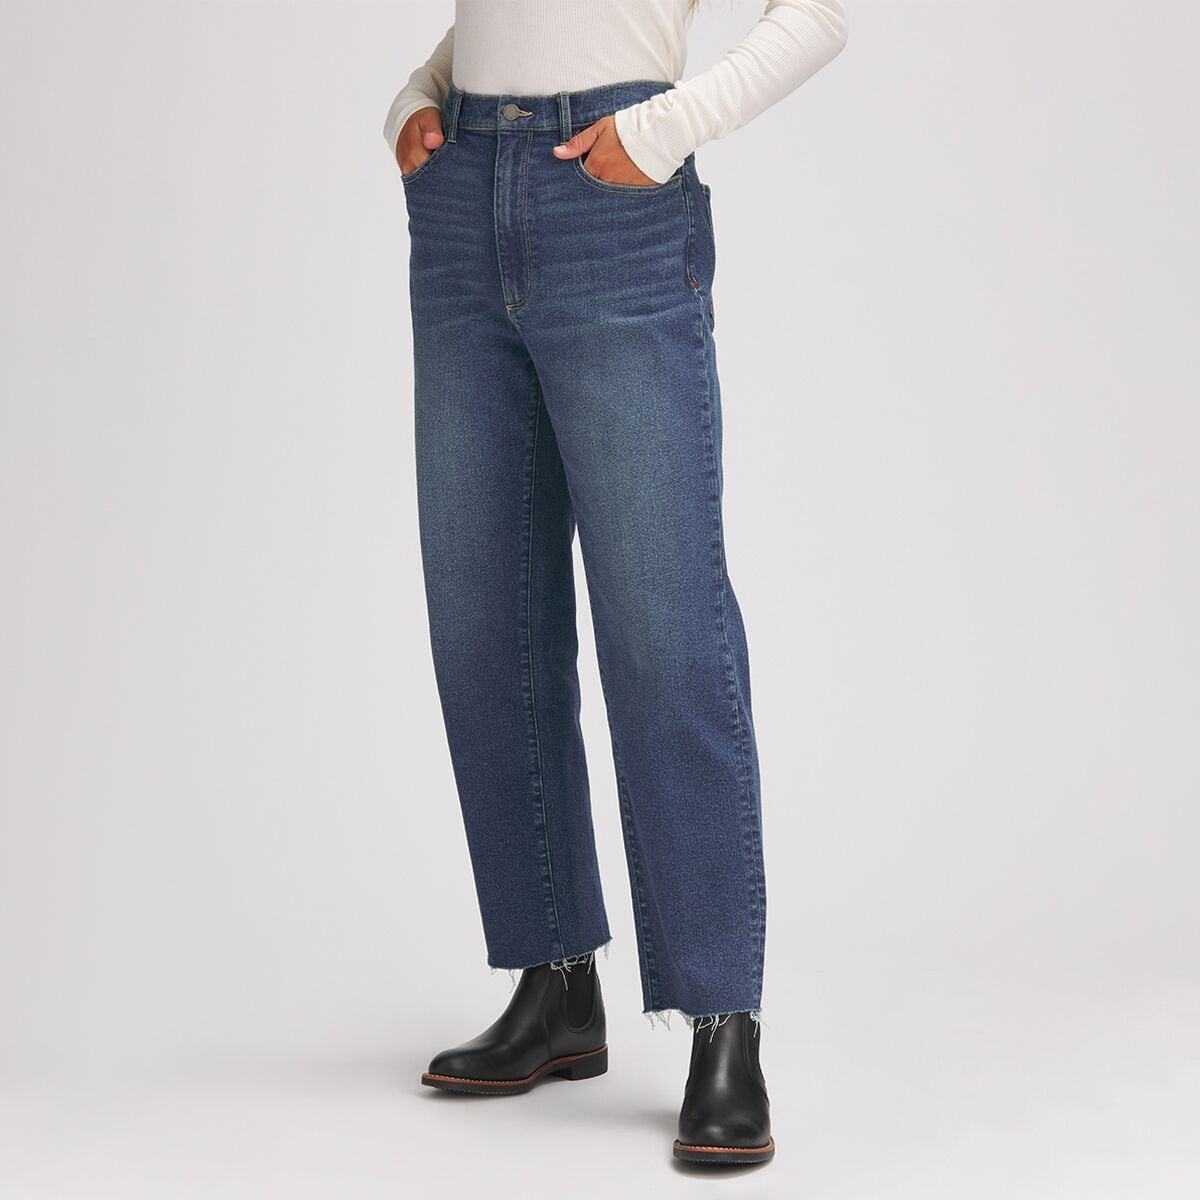 Basin and Range Stovepipe Jean Pant - Women's - Clothing